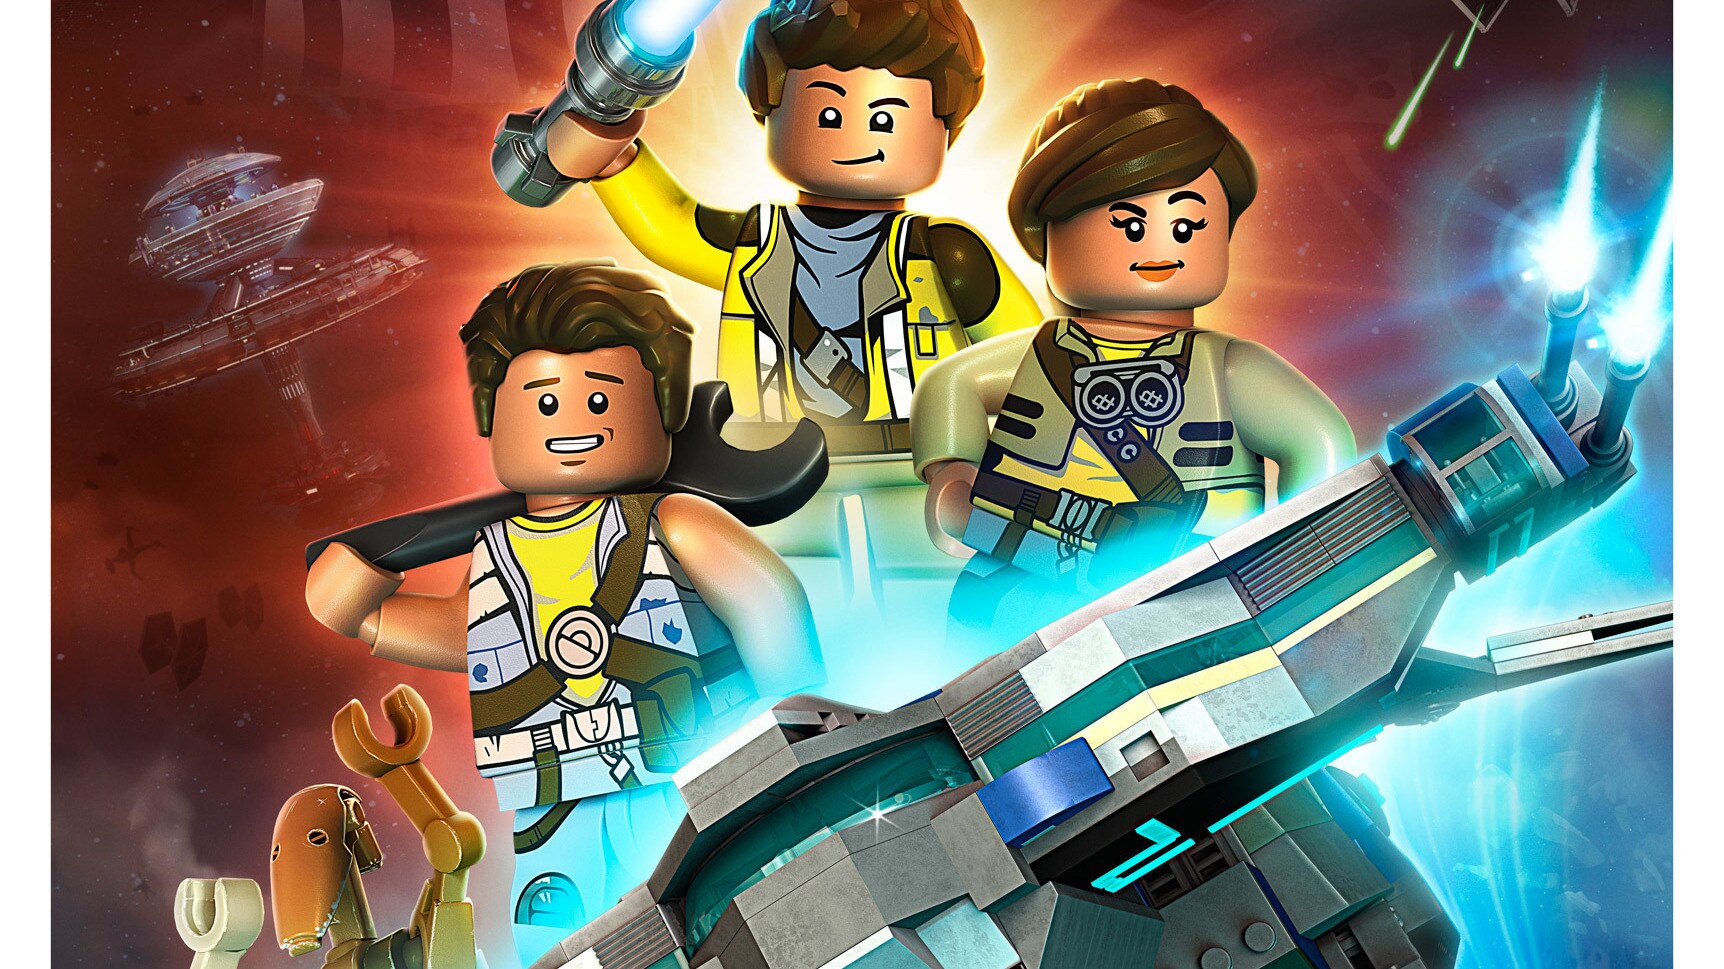 LEGO Star Wars: The Freemaker Adventures - Complete Season One Coming to Blu-ray and DVD